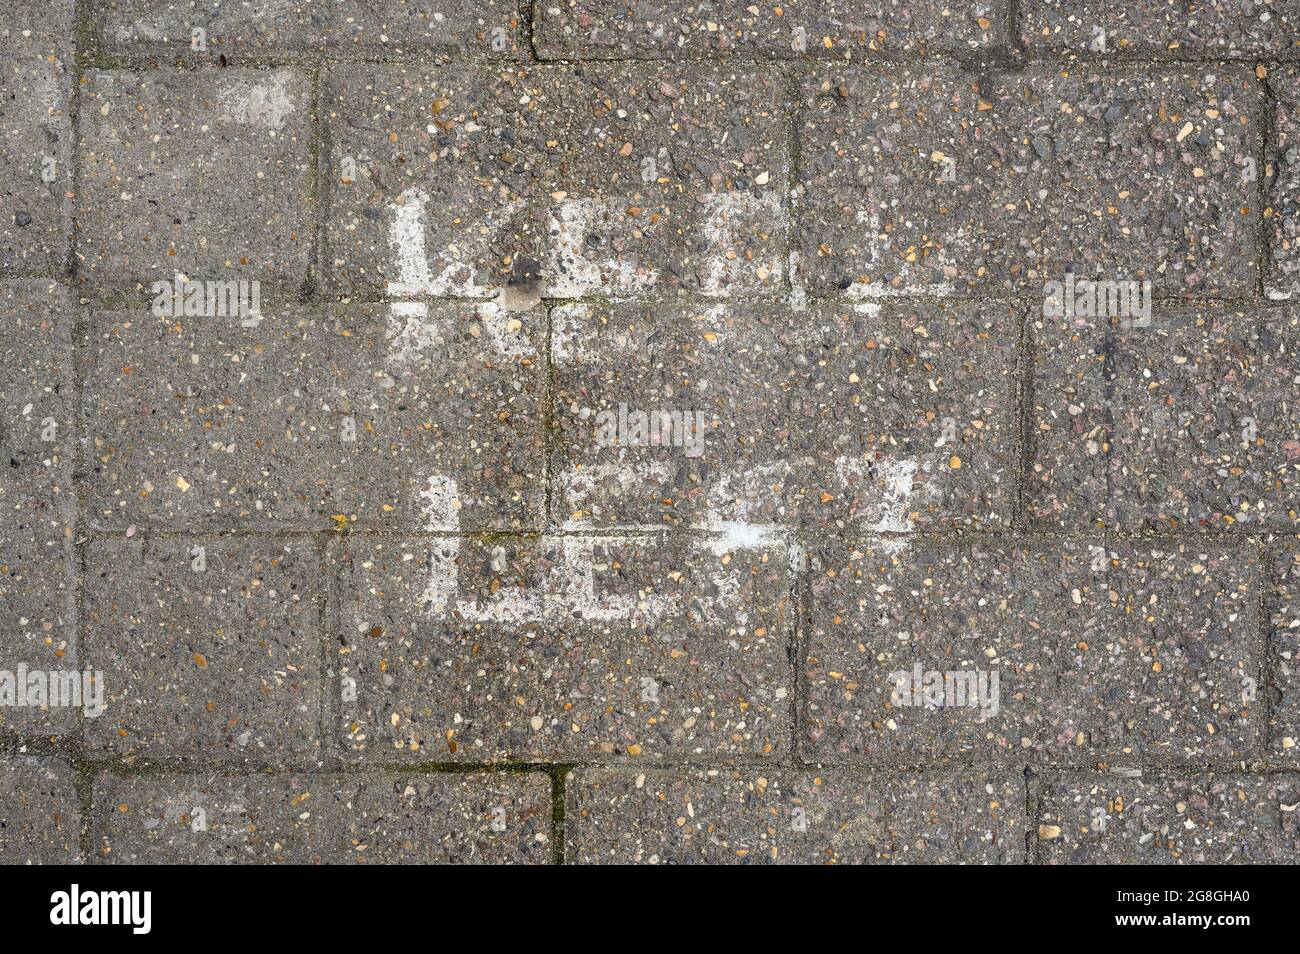 Faded Keep Left social distancing sign painted onto block paving. Stock Photo